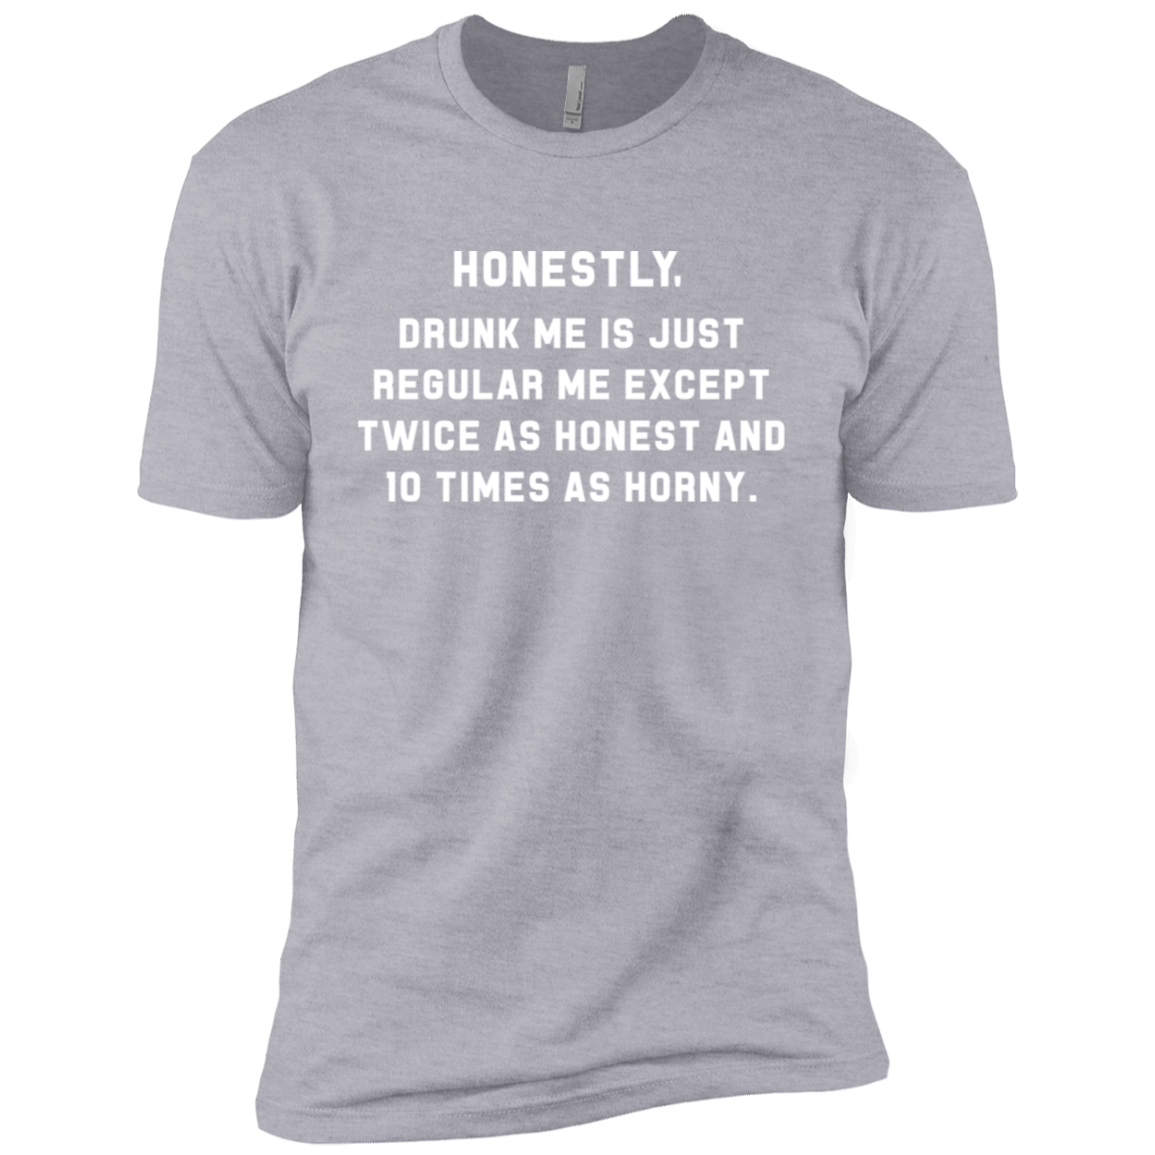 Honestly, Drunk Me Honest And Horny T-Shirt Apparel - The Beer Lodge